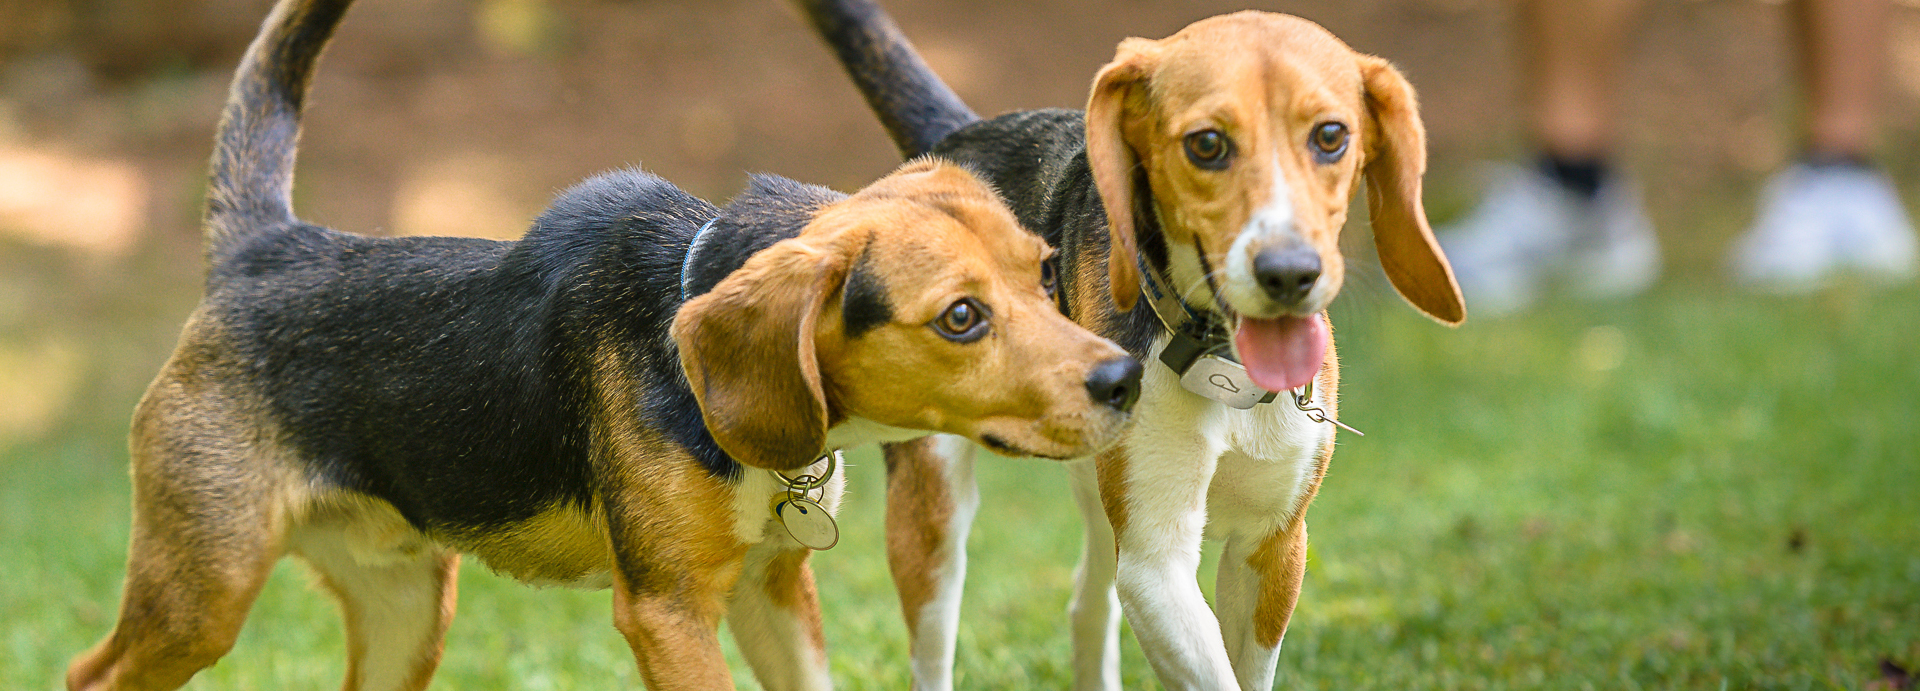 Grounds and Hounds Rescue Roast initiative partners with Beagle Freedom Project